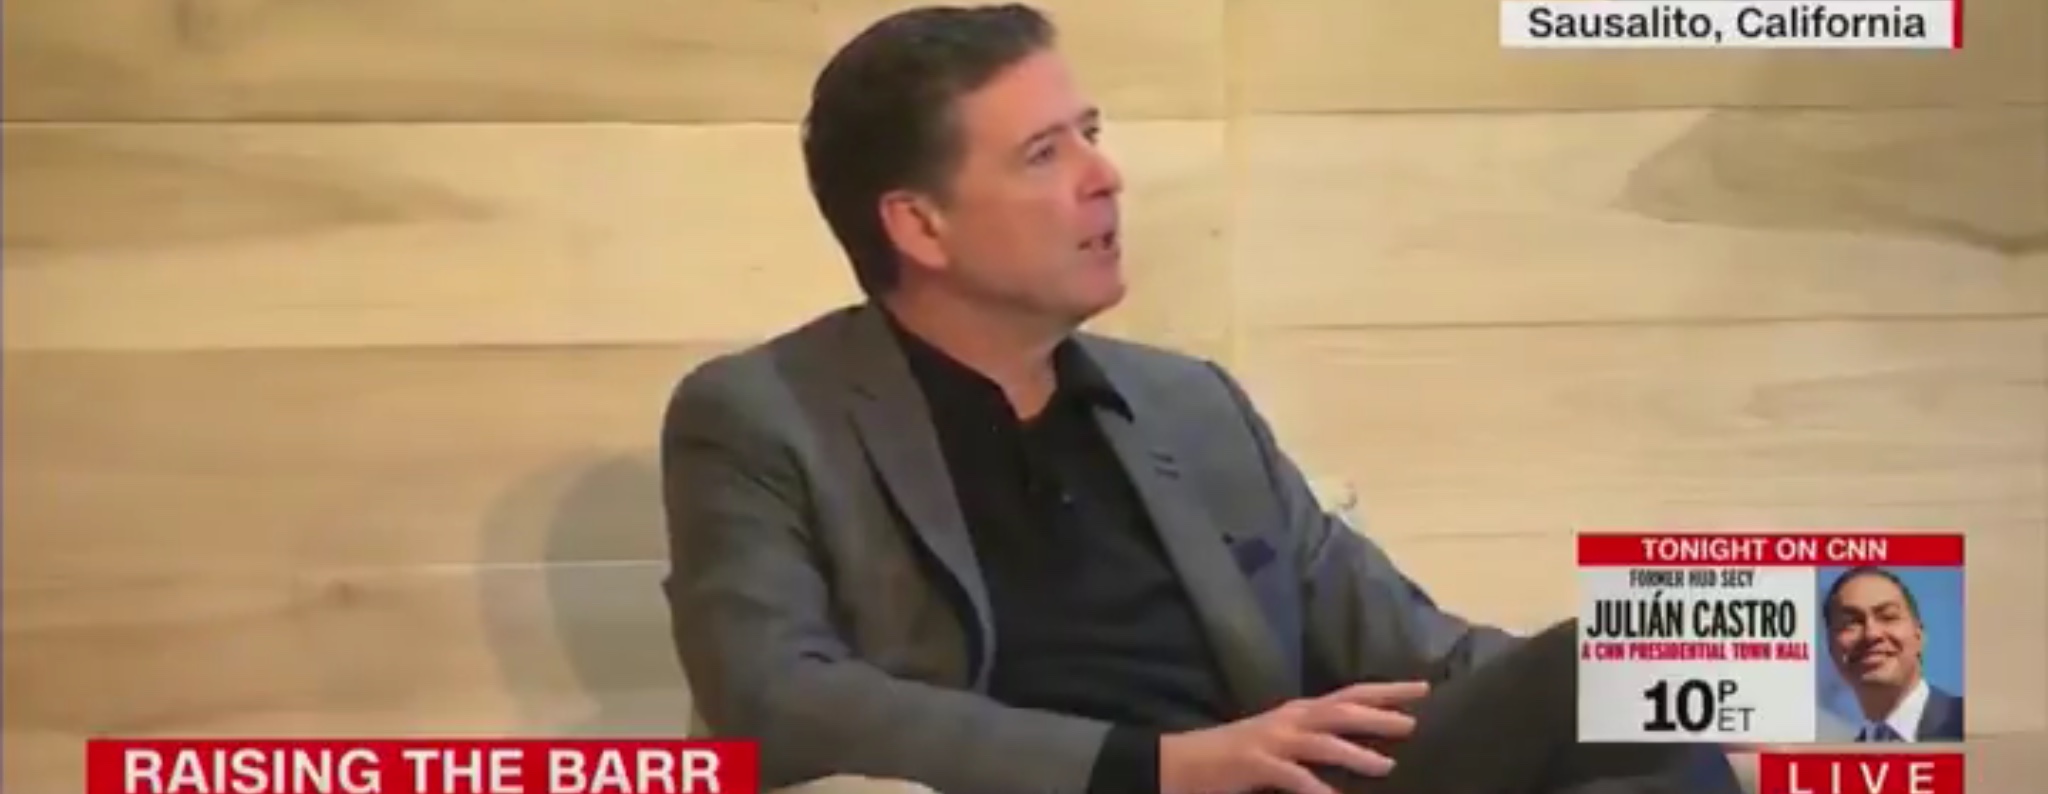 Former FBI Director James Comey talks to CNN about AG William Barr’s contention that the FBI was “spying” on the Trump election campaign, Apr. 11, 2019. CNN screencapture via Twitter.